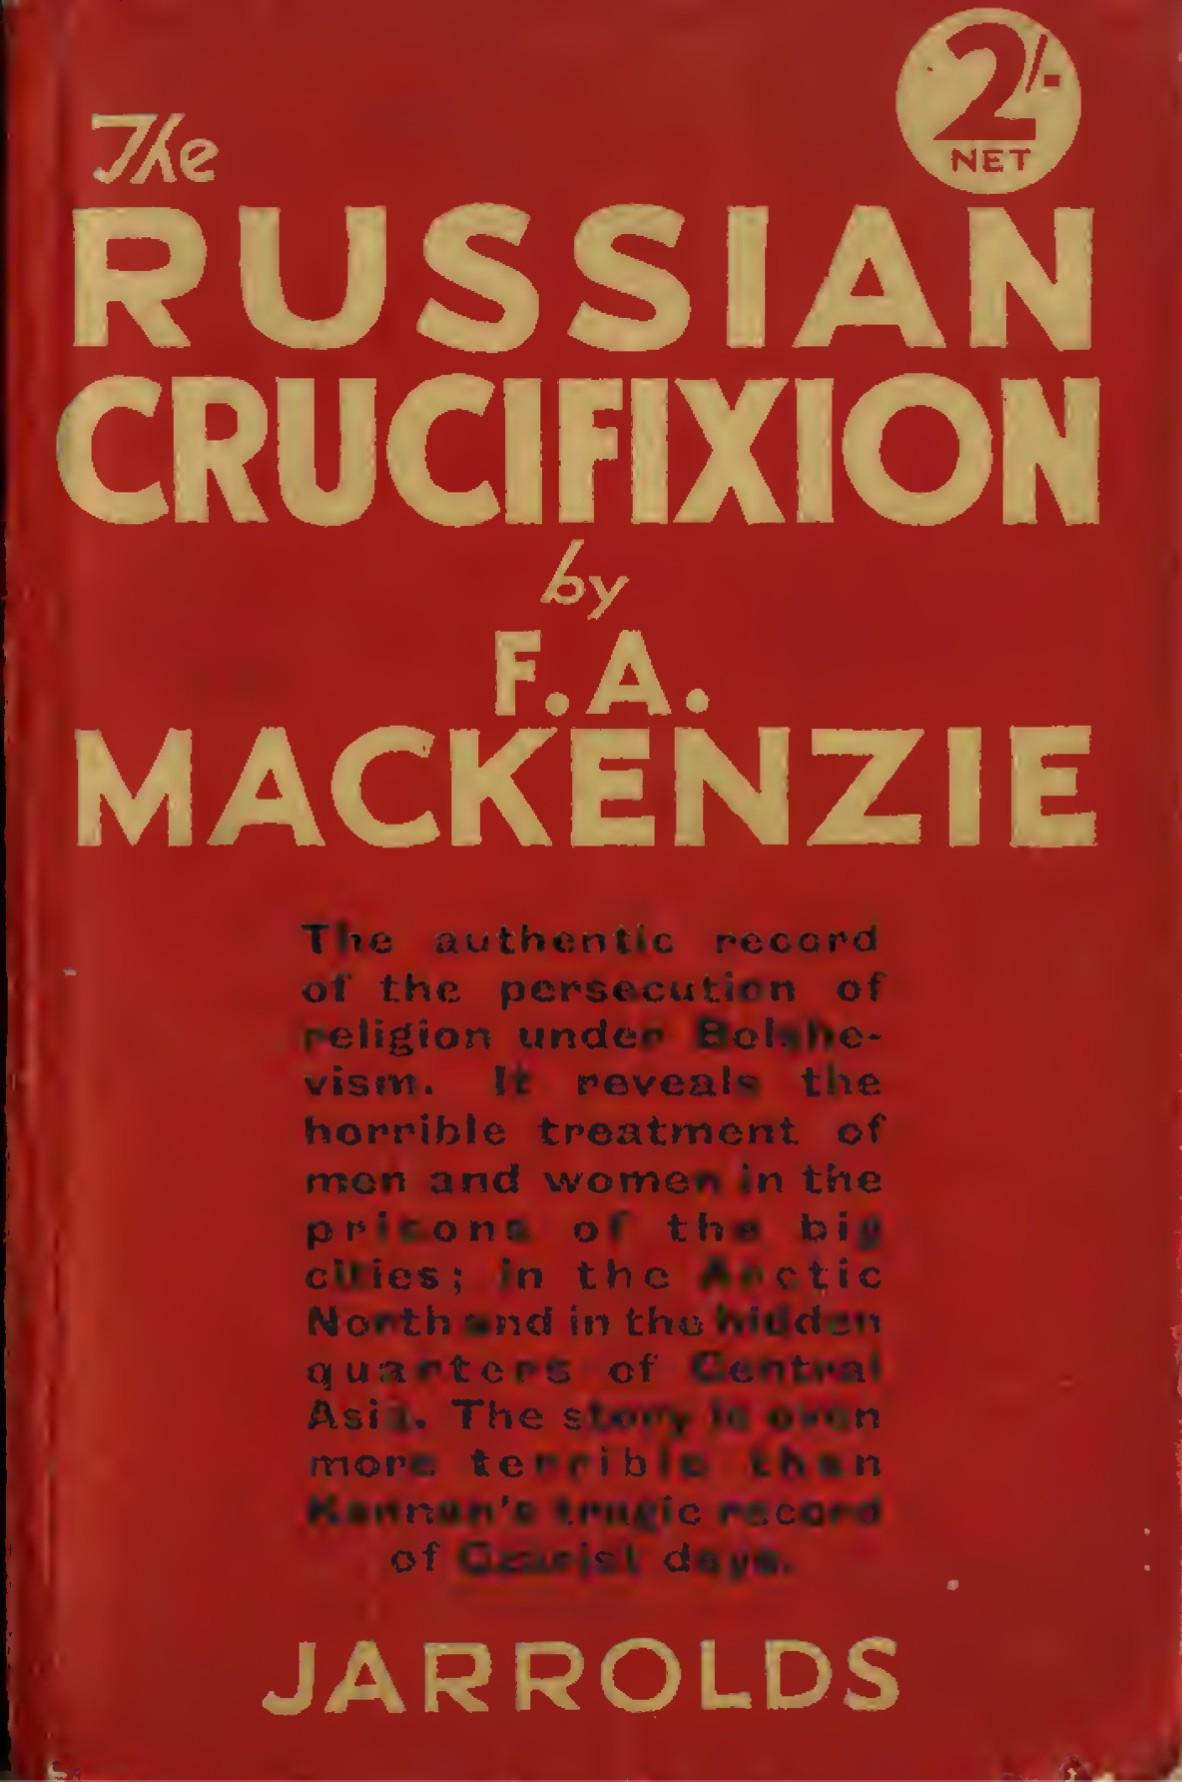 The Russian Crucifixion: The full story of the persecution or Religion under Bolshevism (1930) by F. A. MacKenzie